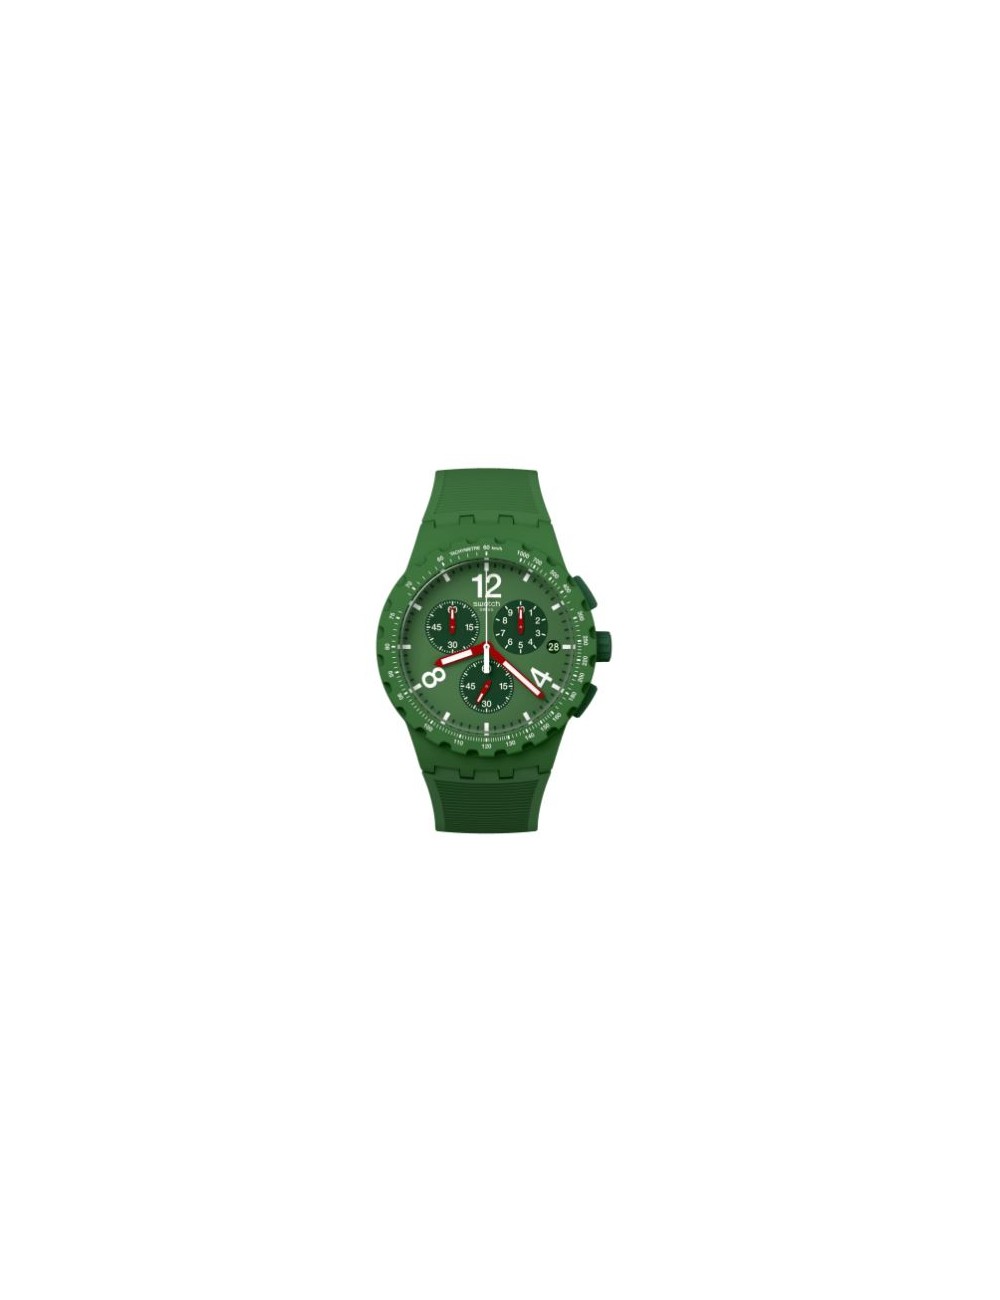 Orologio Swatch Primarily Green